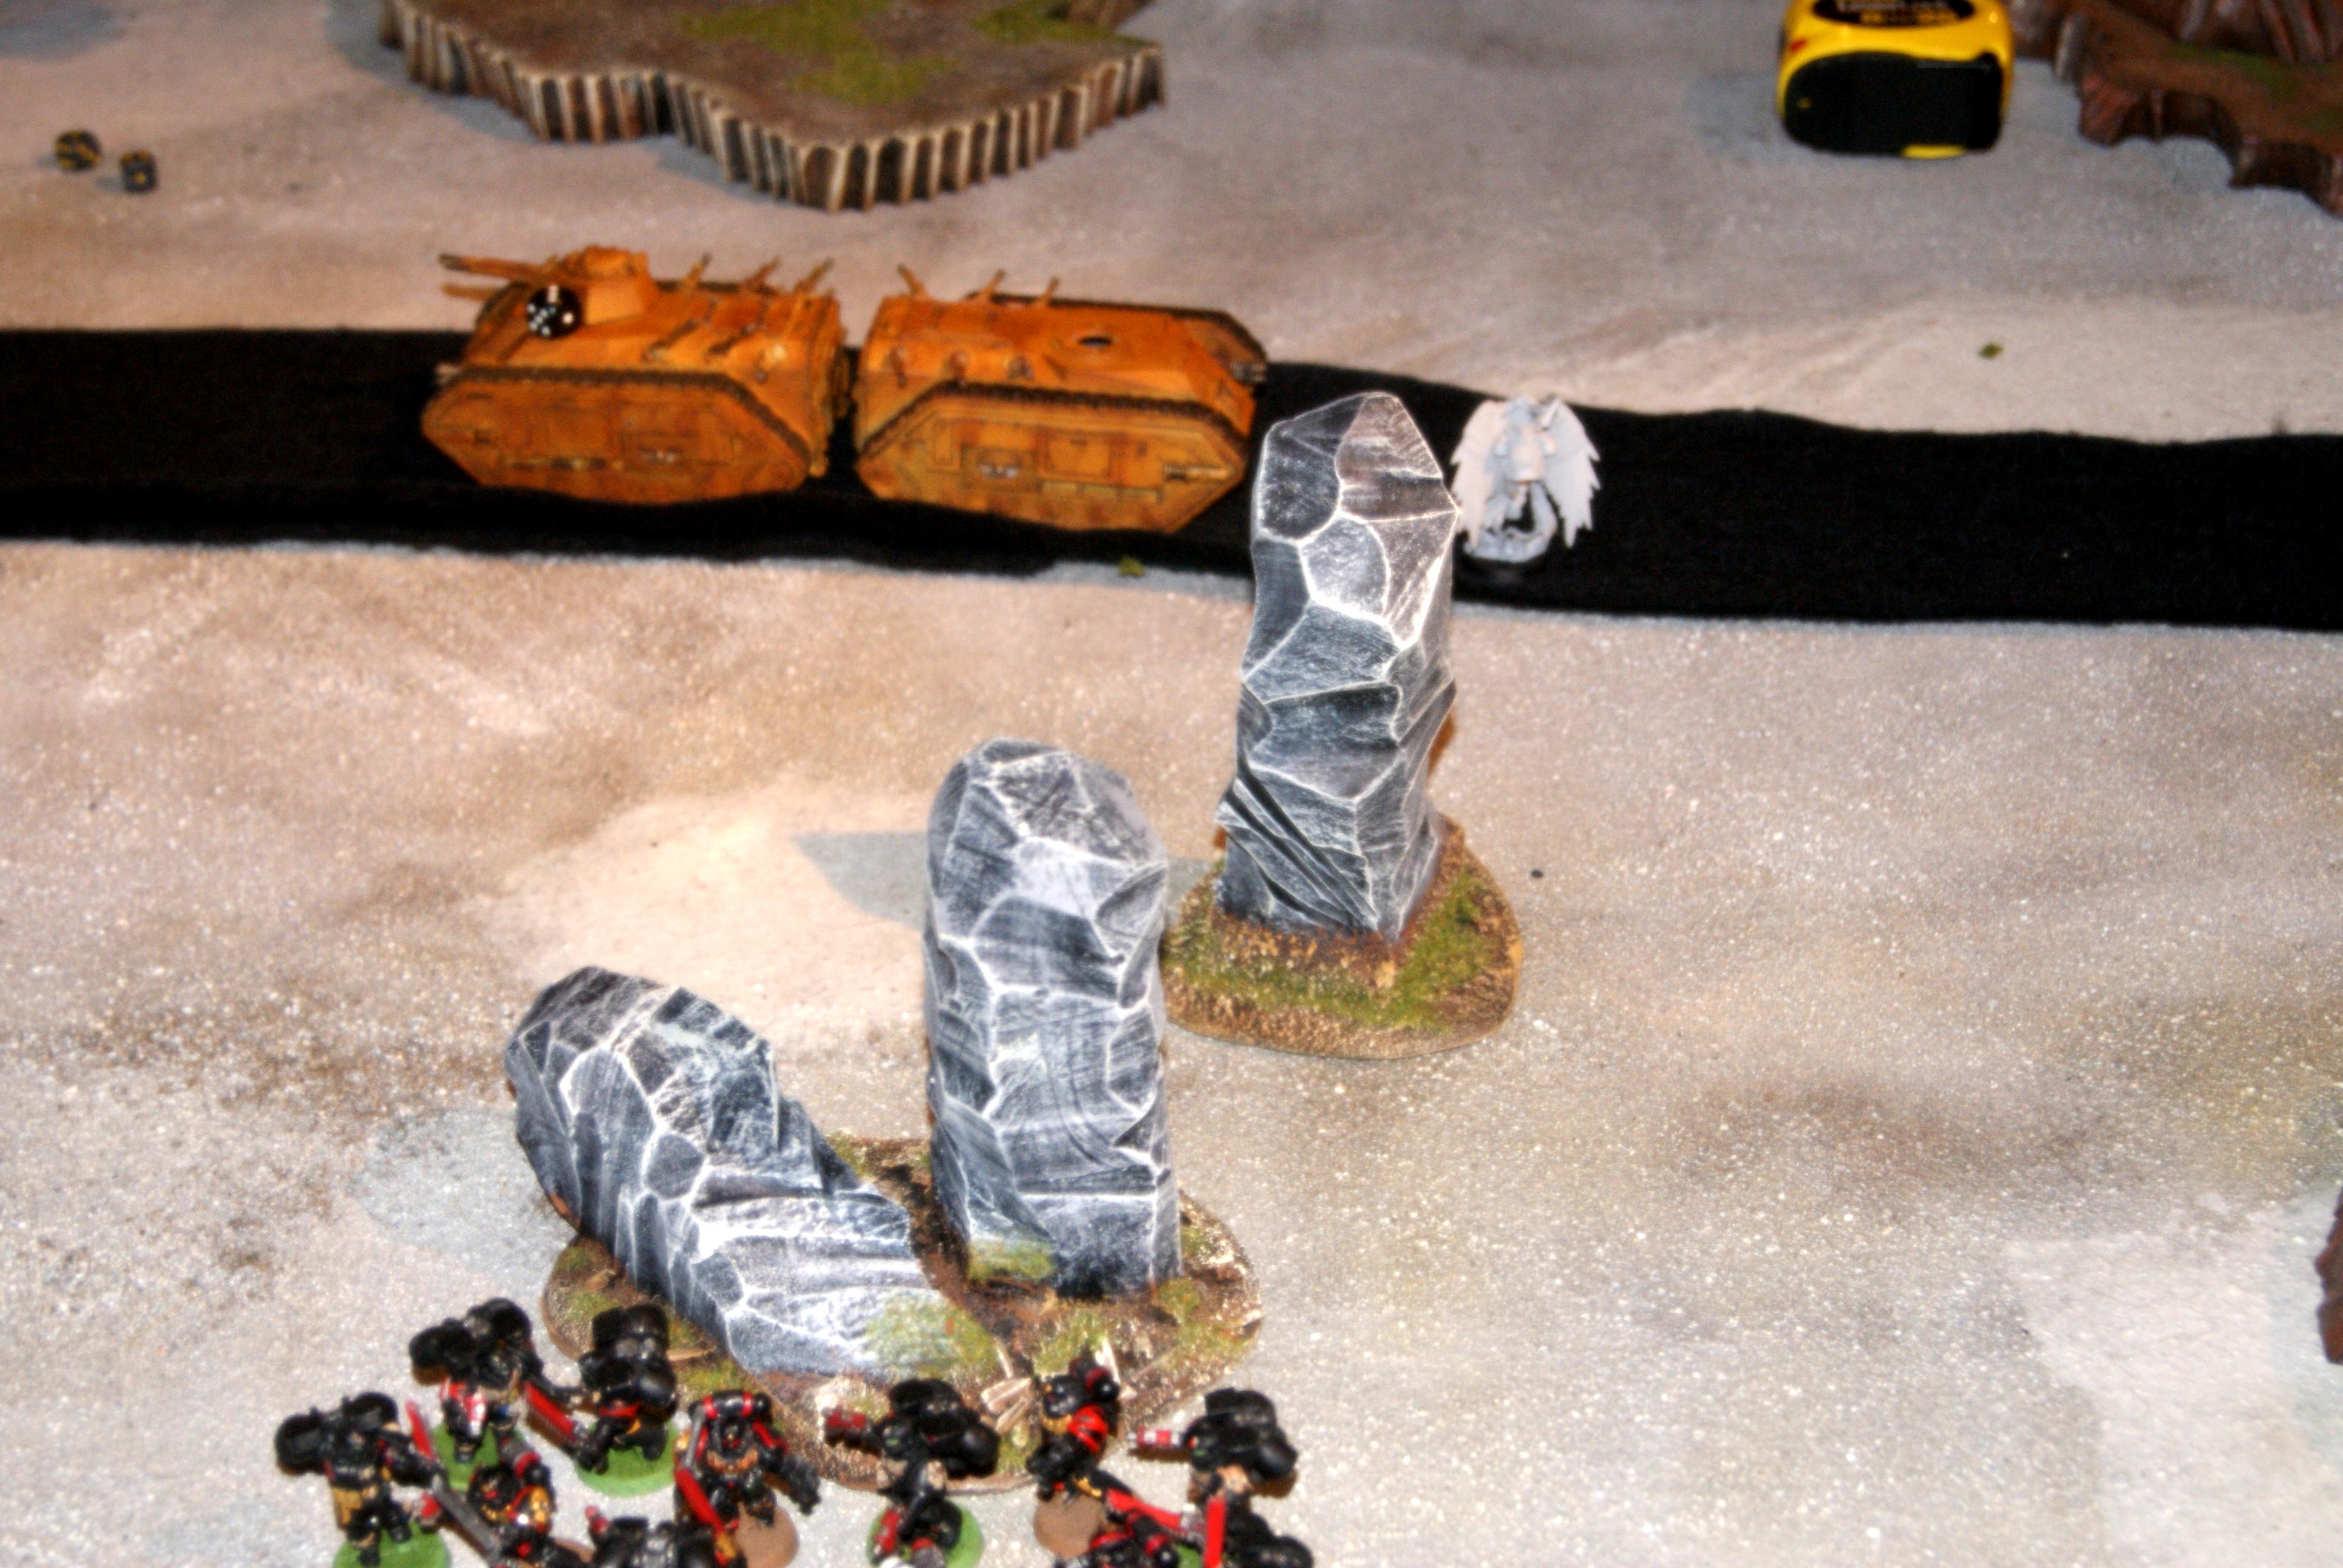 Tanks roll towards the end of the table